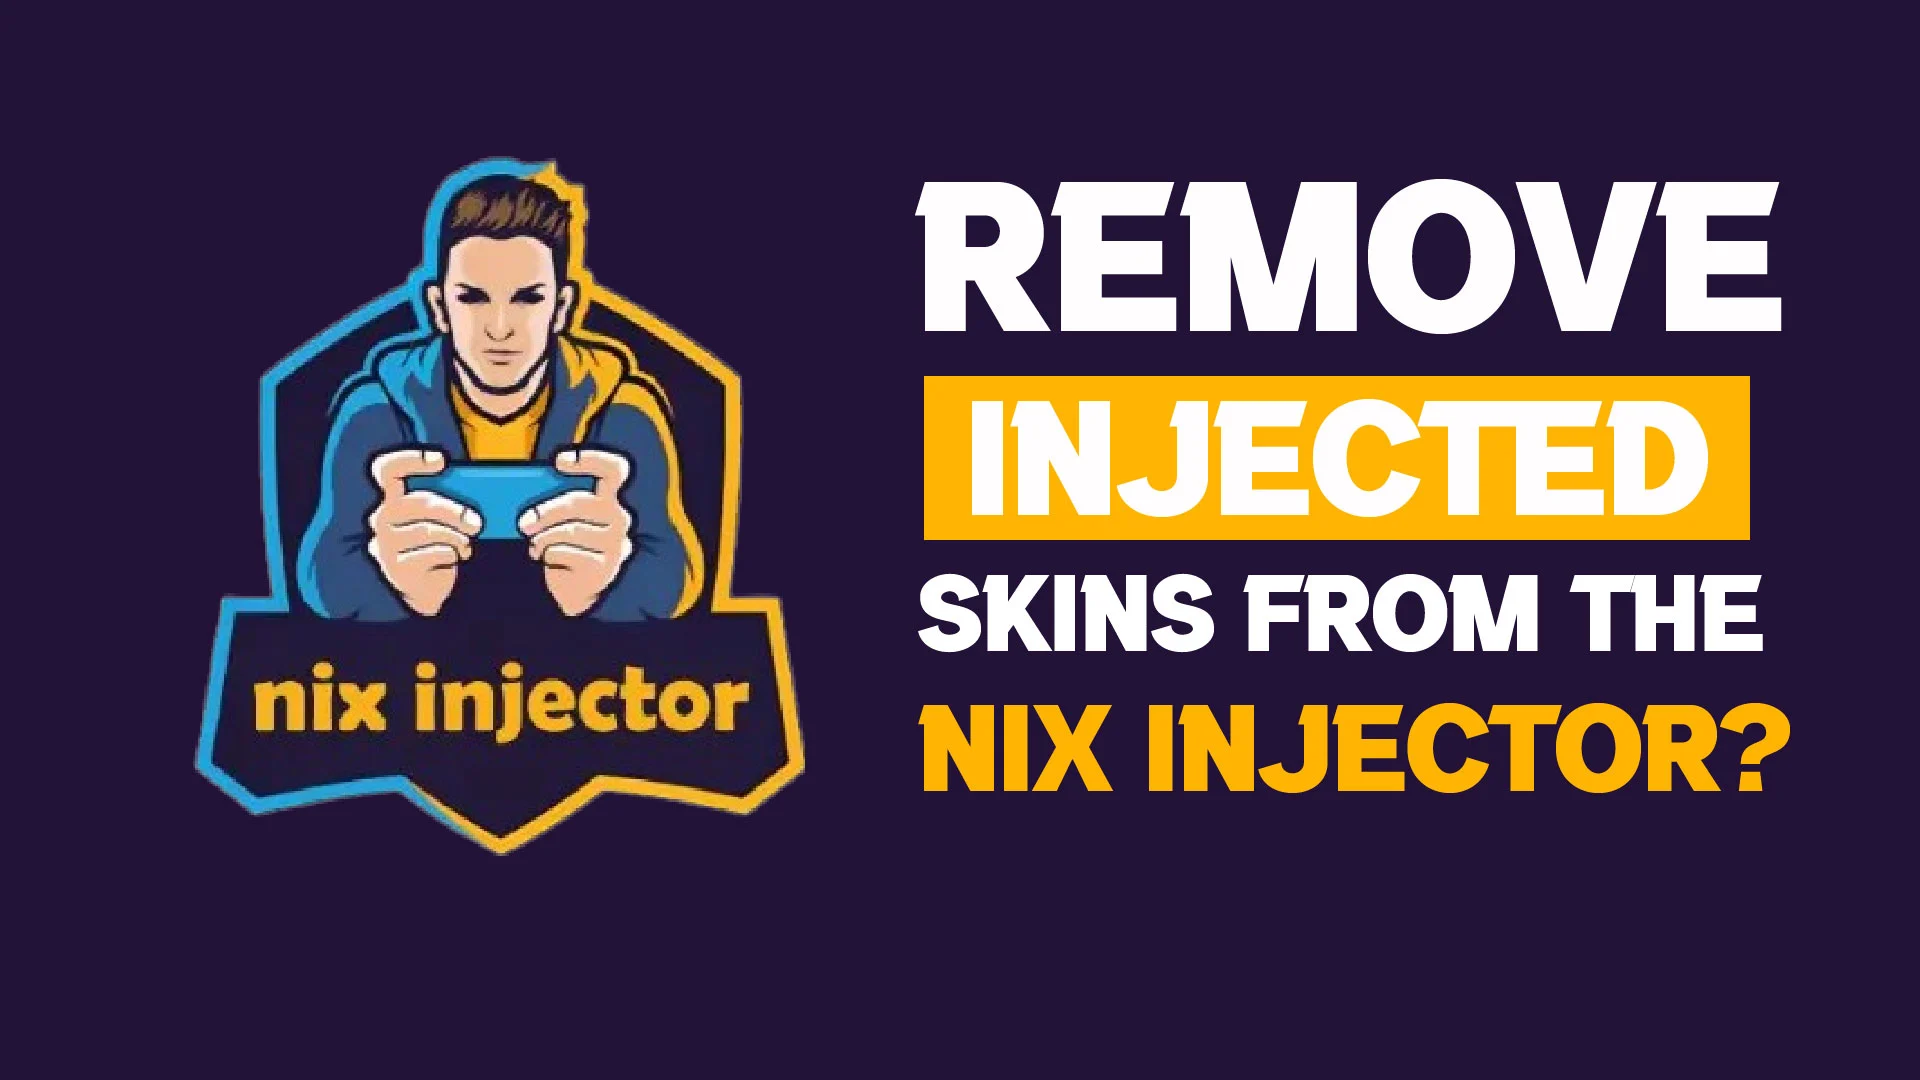 How do you remove injected skins and uninstall the Nin Injector. 